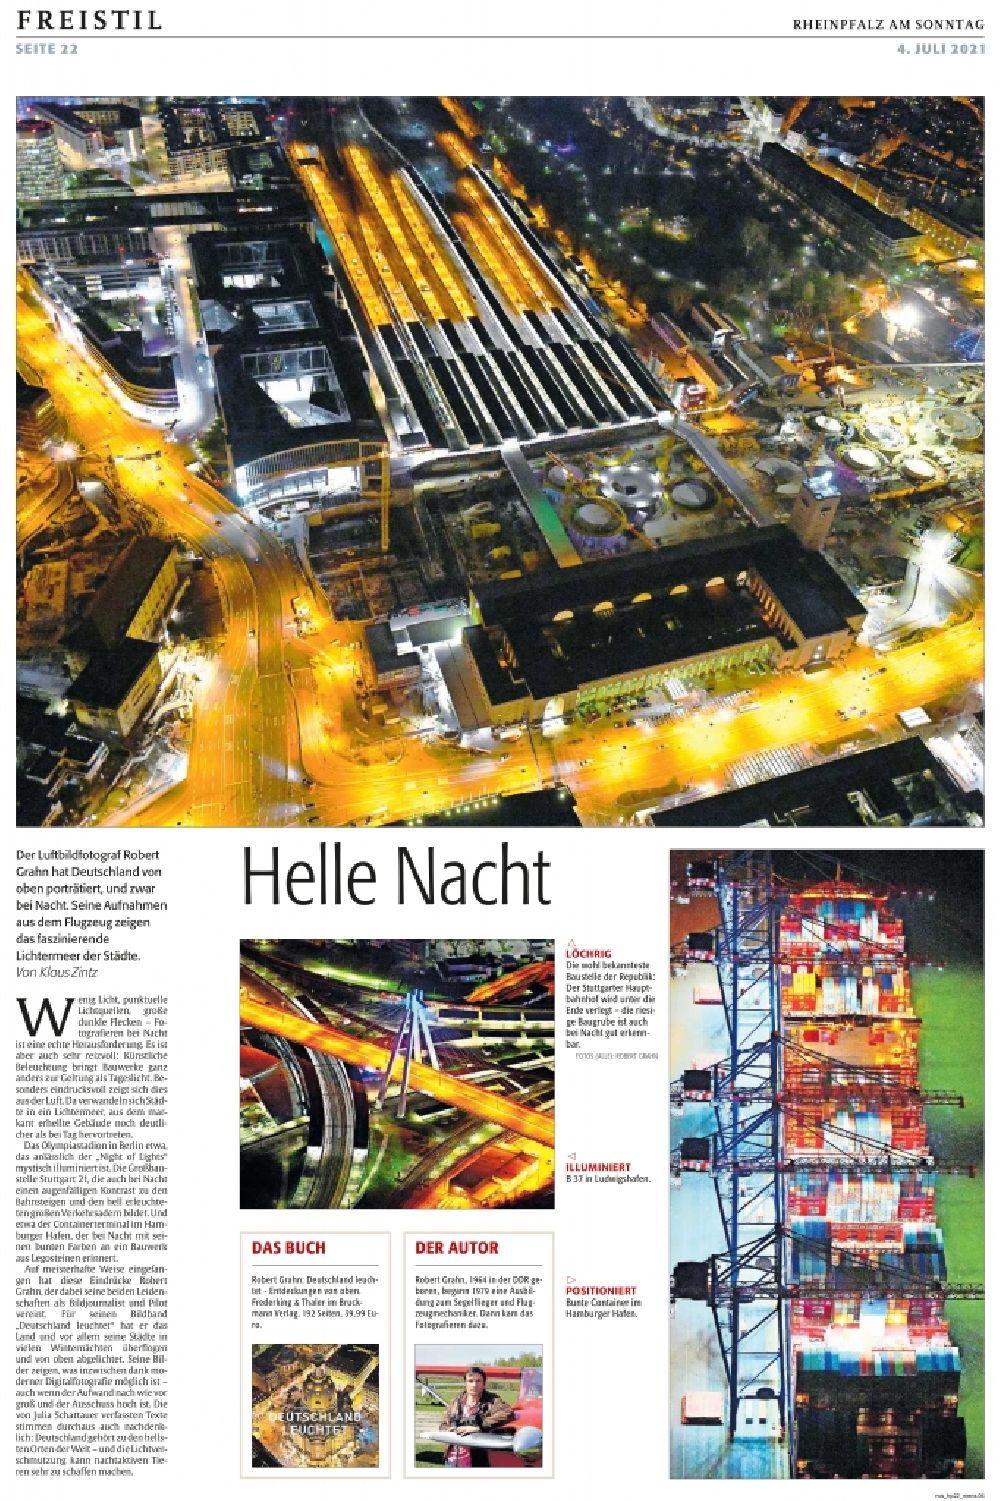 Ludwigshafen am Rhein from the bird's eye view: Picture Section / media use of aerial use in the Newspaper - daily paper RHEINPFALZ on SONNTAG - Seite 22, added to in Ludwigshafen am Rhein in the state Rhineland-Palatinate, Germany